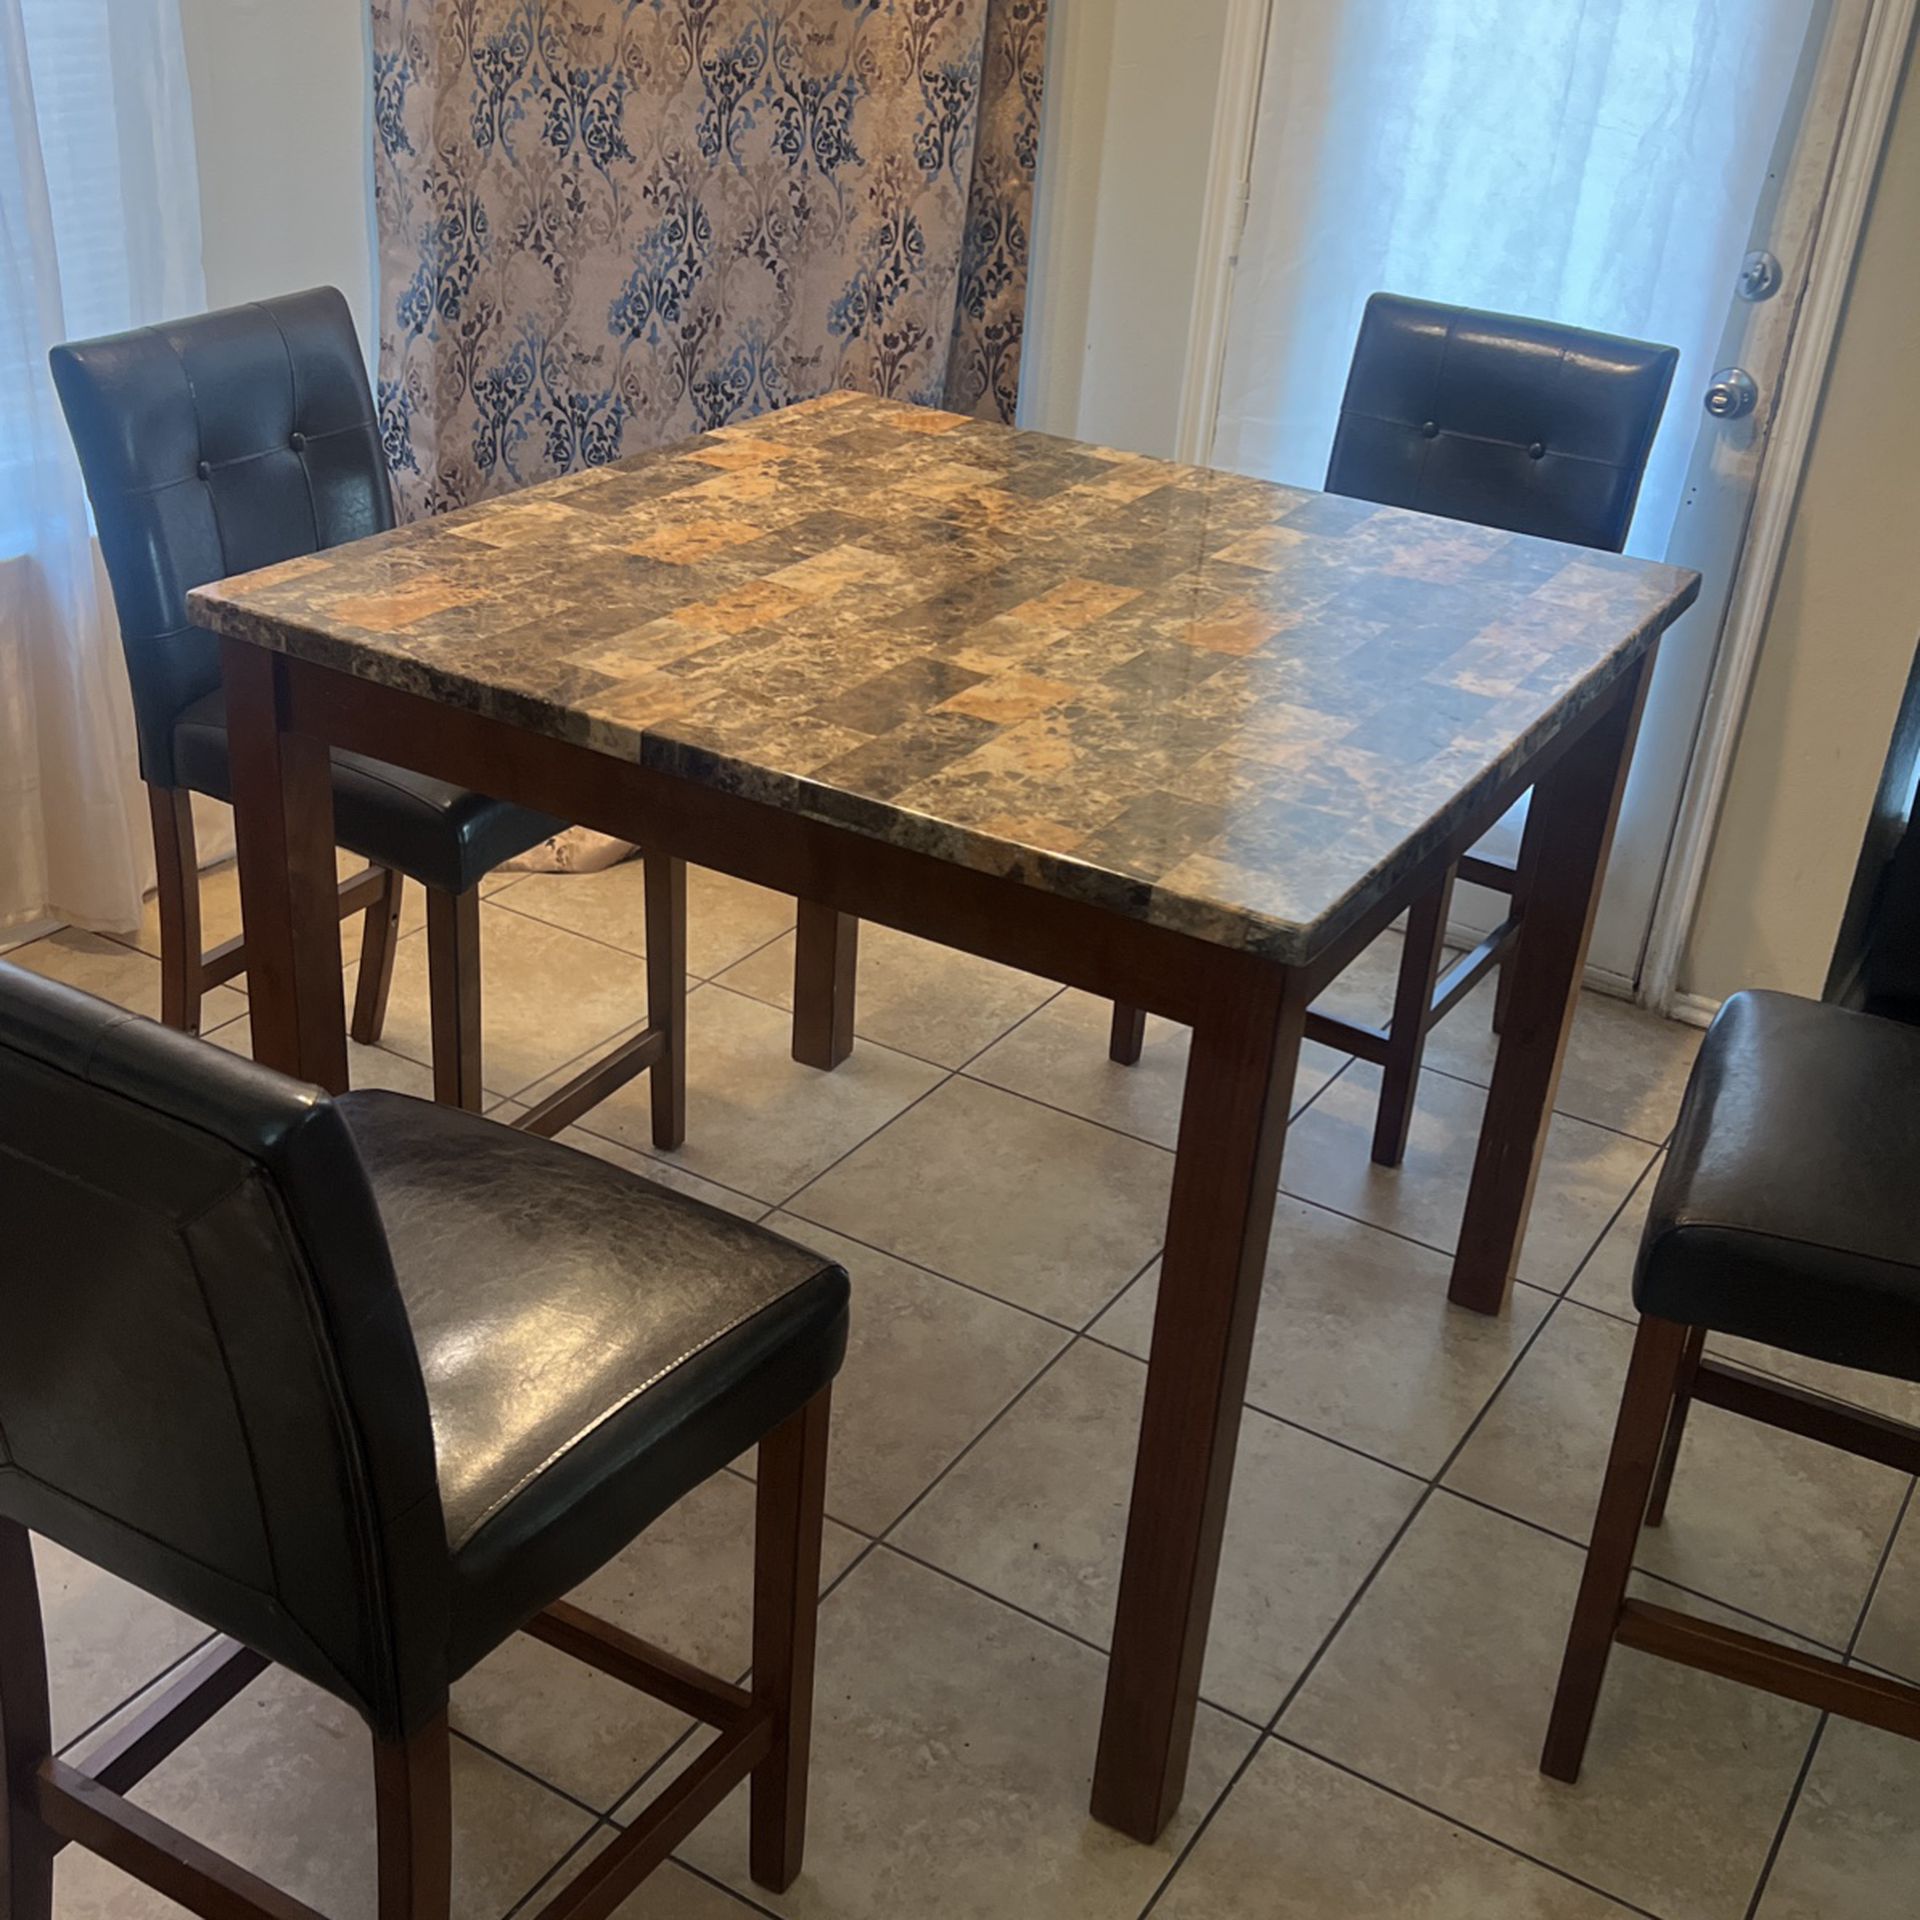 Marble Table W/chairs Included